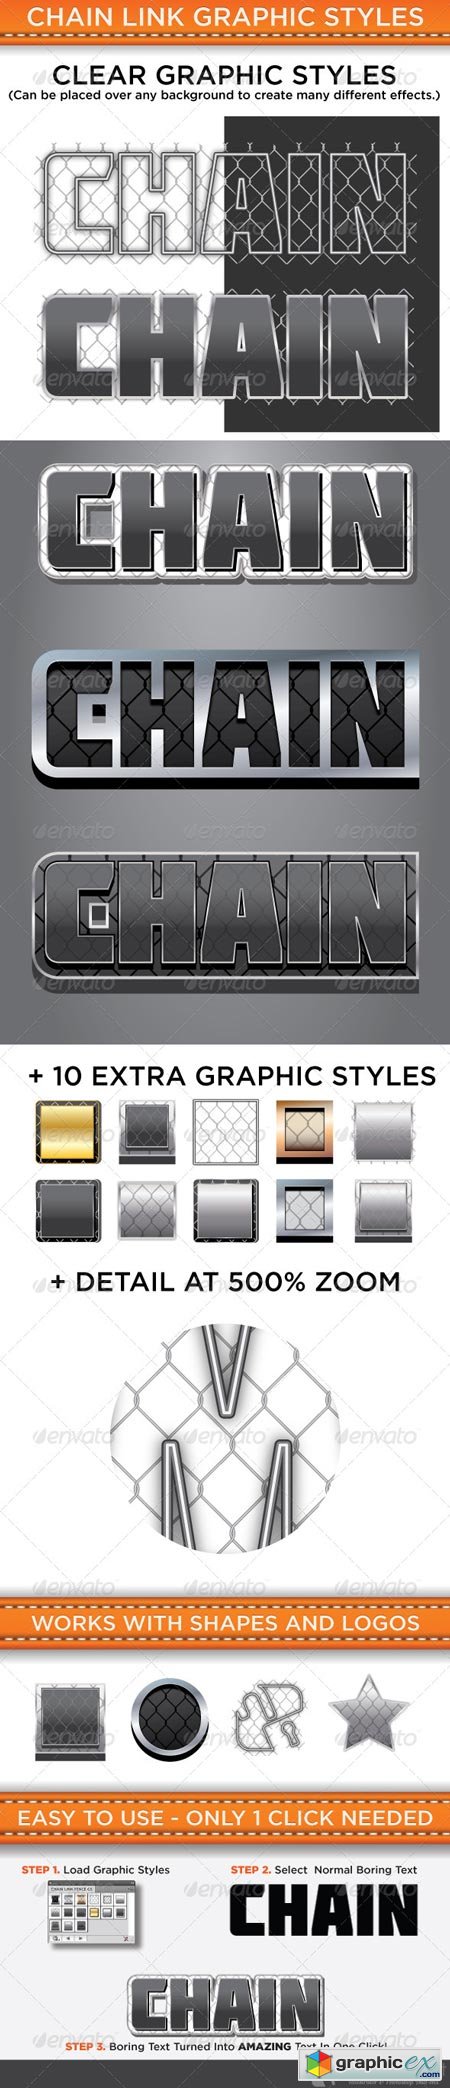 Chain Link Graphic Styles 4623465